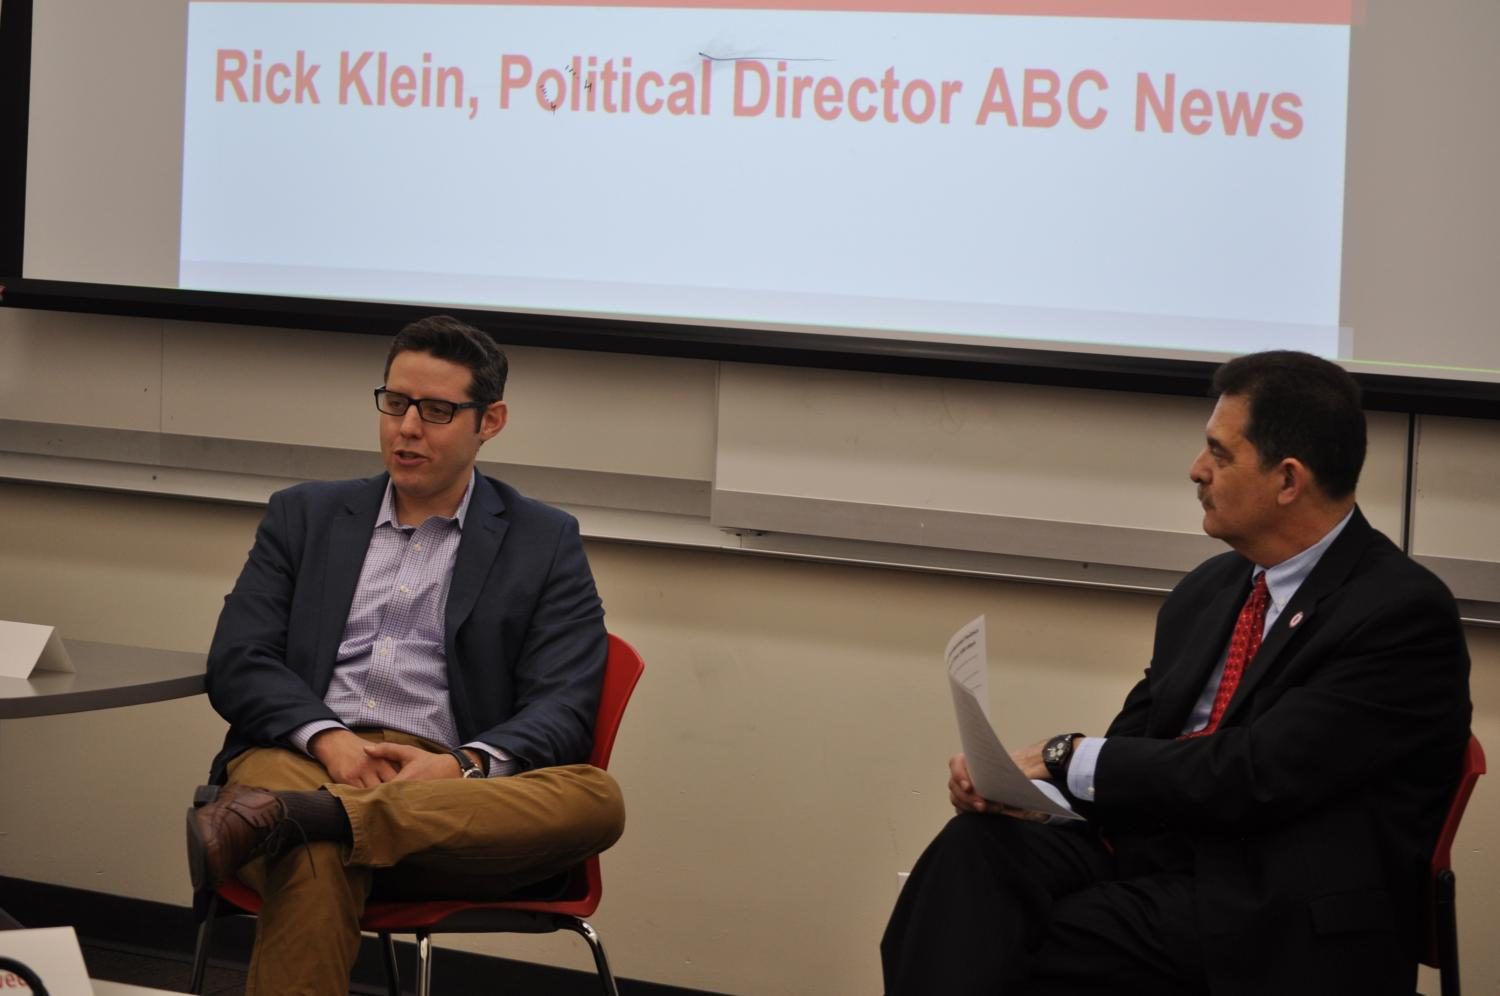 Professor Michael Rizzo, right, moderated the question-and-answer session with Rick Klein.